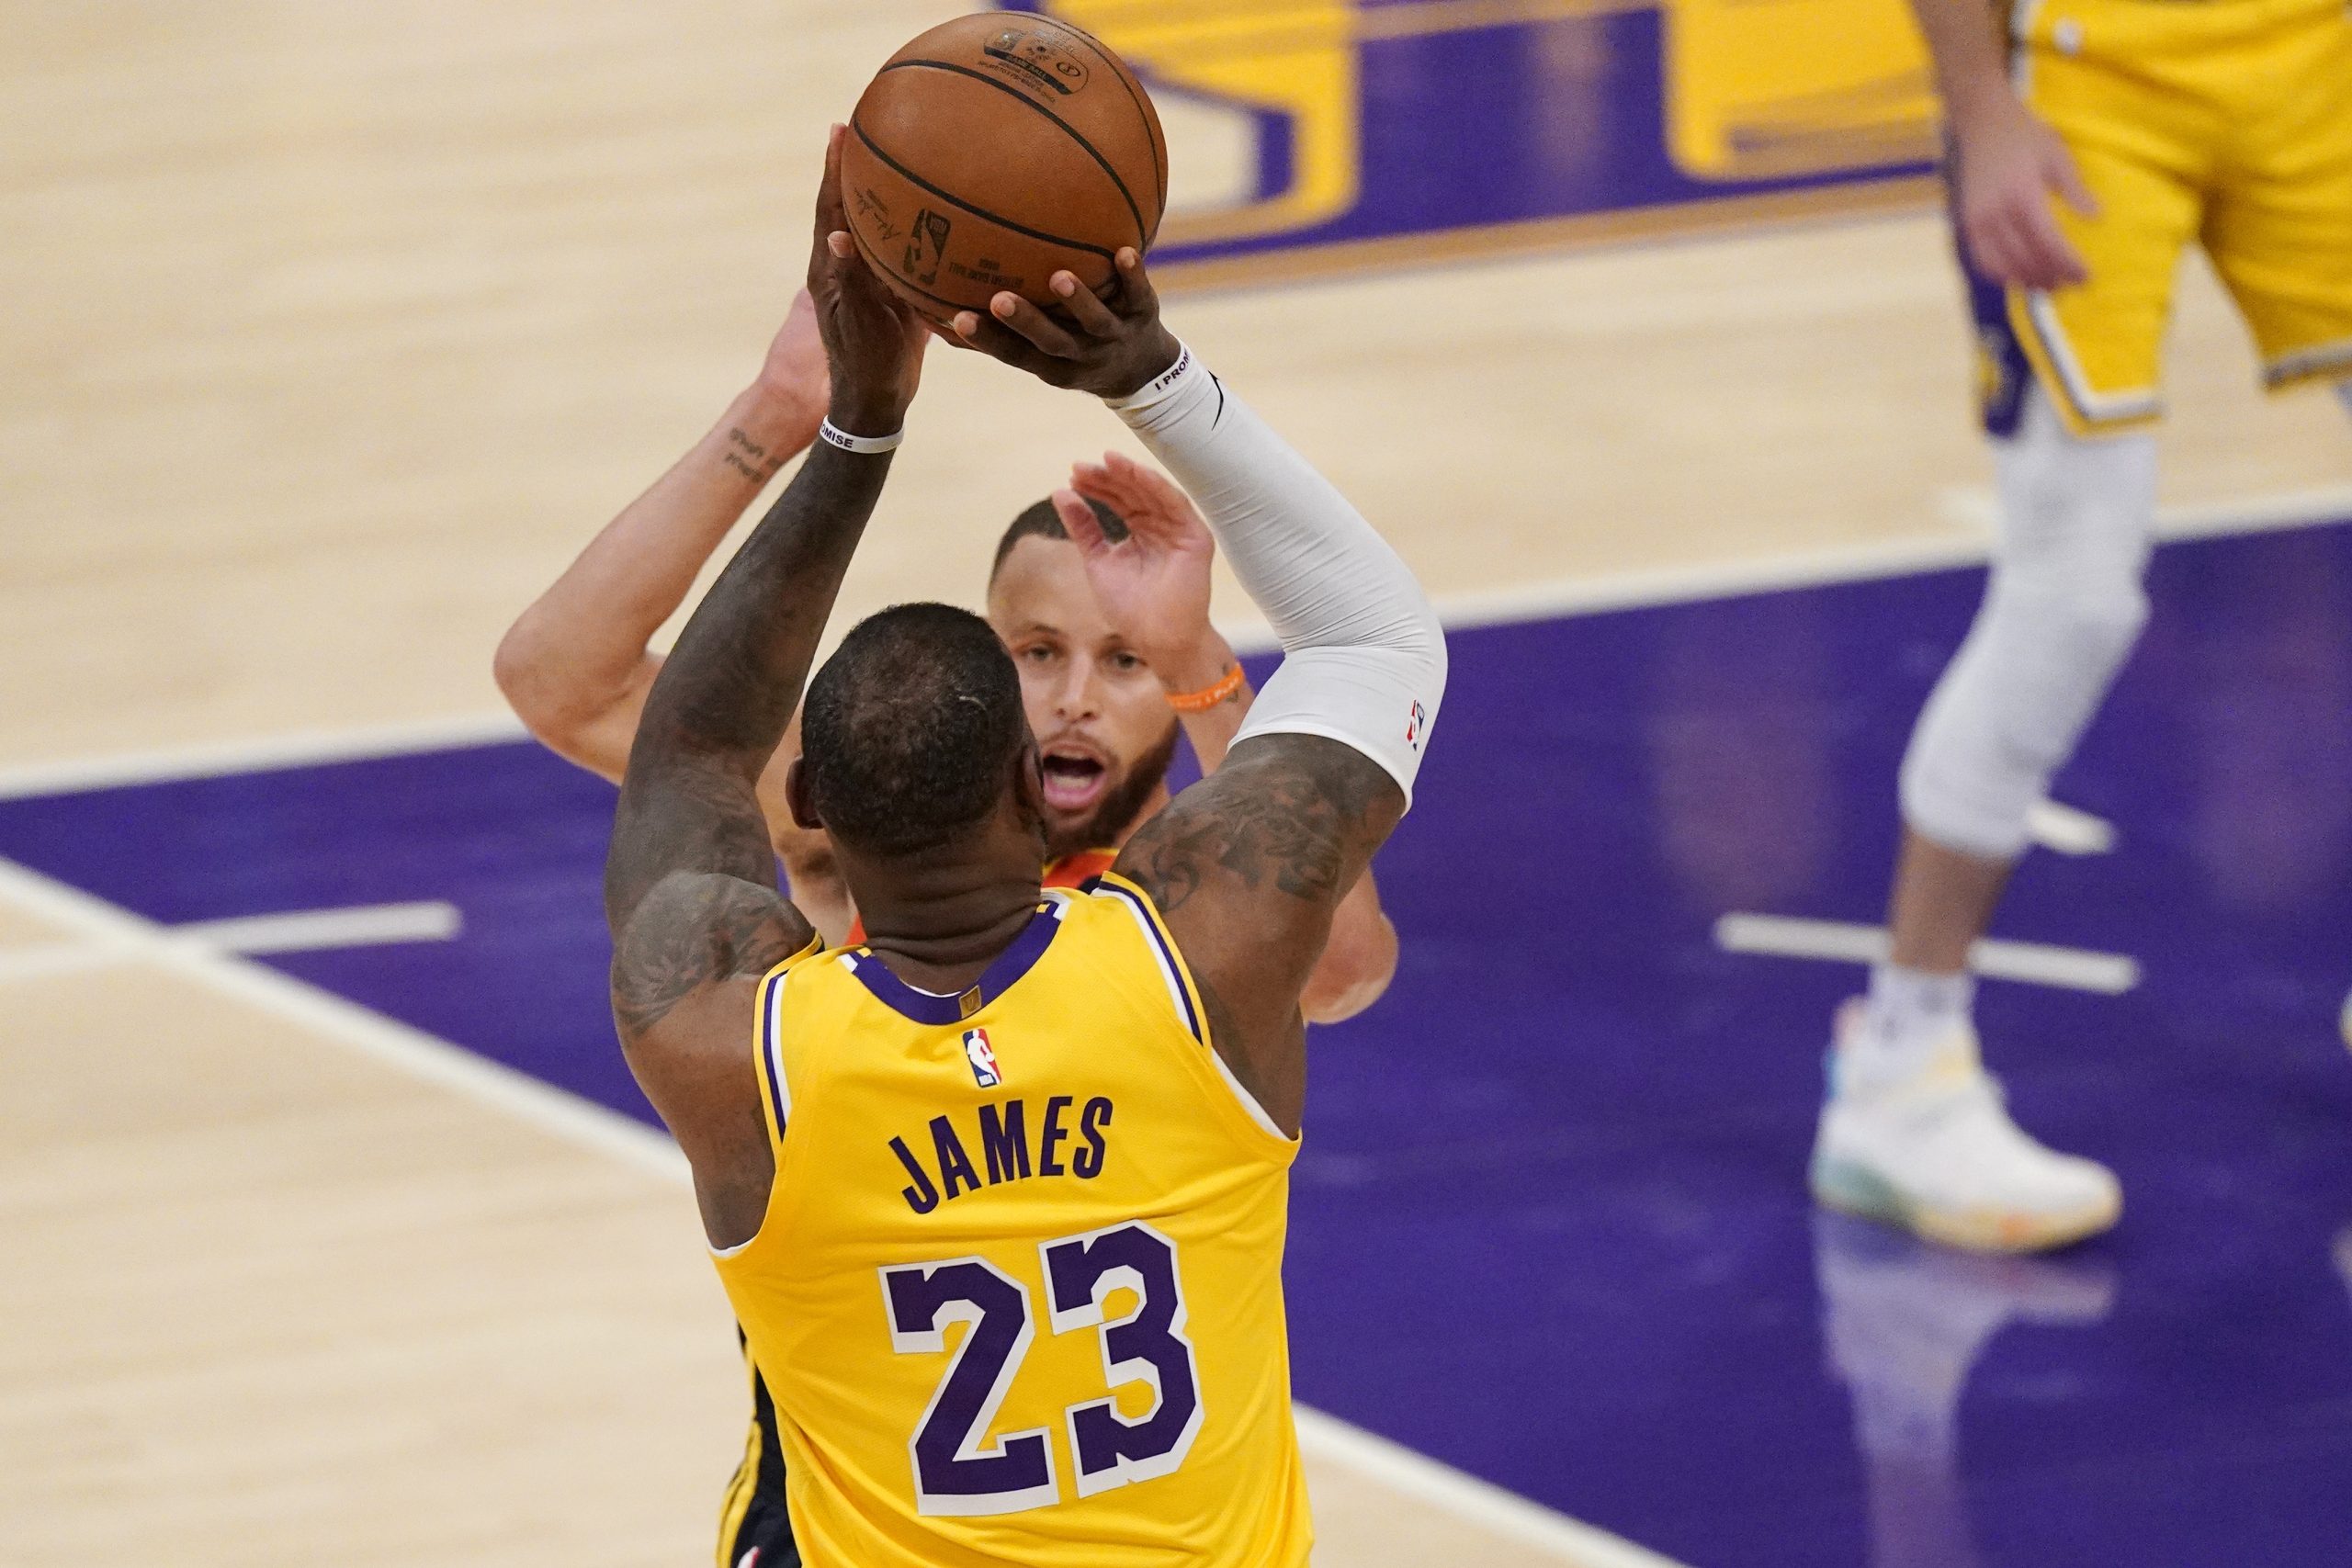 LeBron James sinks game-winning three-pointer for Lakers over Warriors